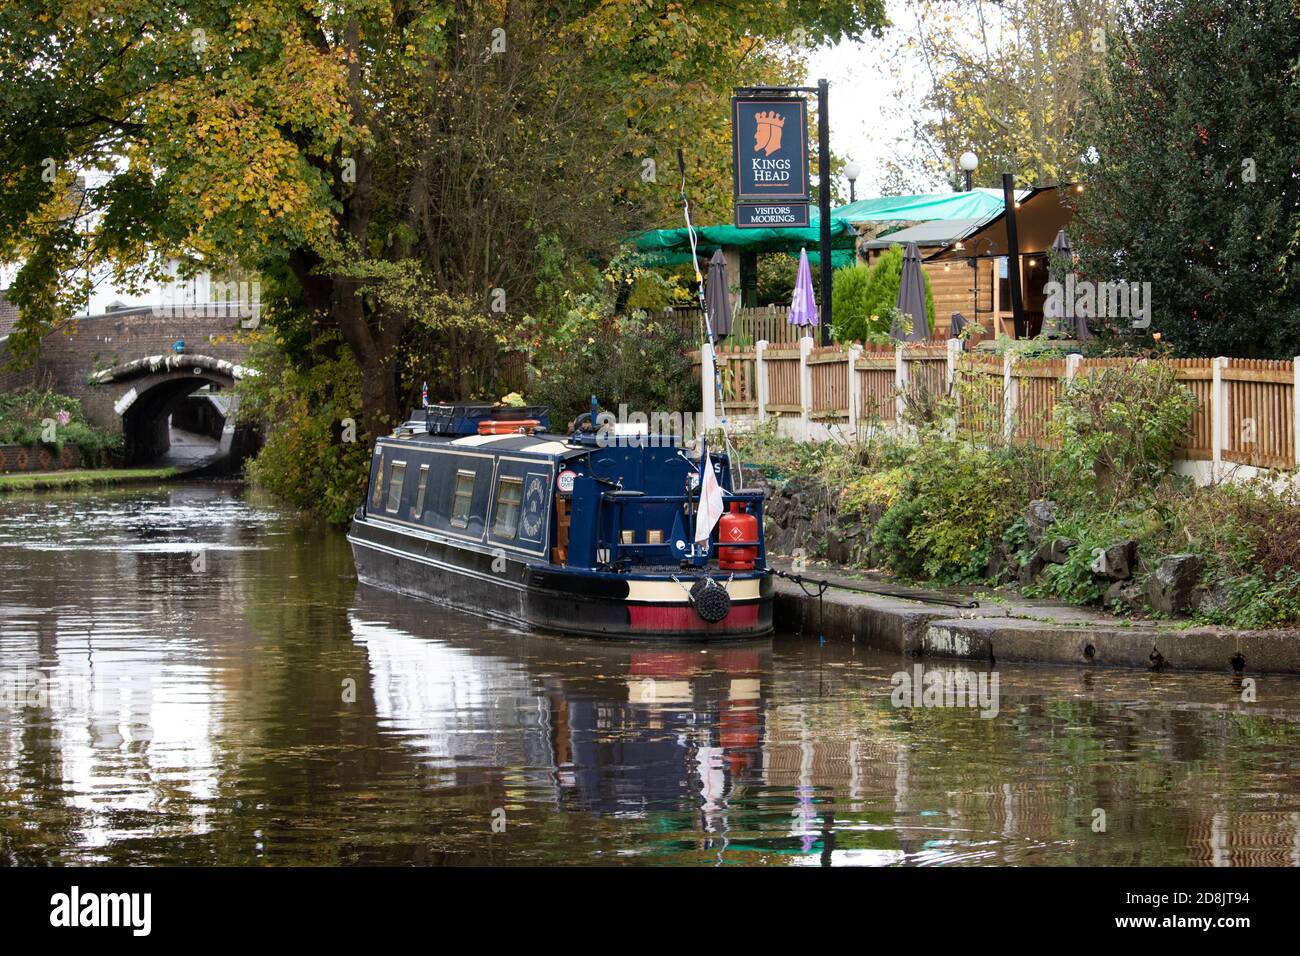 Canal boats on the Coventry canal in Atherstone, North Warwickshire. A canal boat moored alongside the Kings Head Pub in Atherstone. In October 2020 lock number two on the Atherstone flight of locks was broken resulting in boats being held up creating a queue of boats waiting to progress along the waterway. Stock Photo